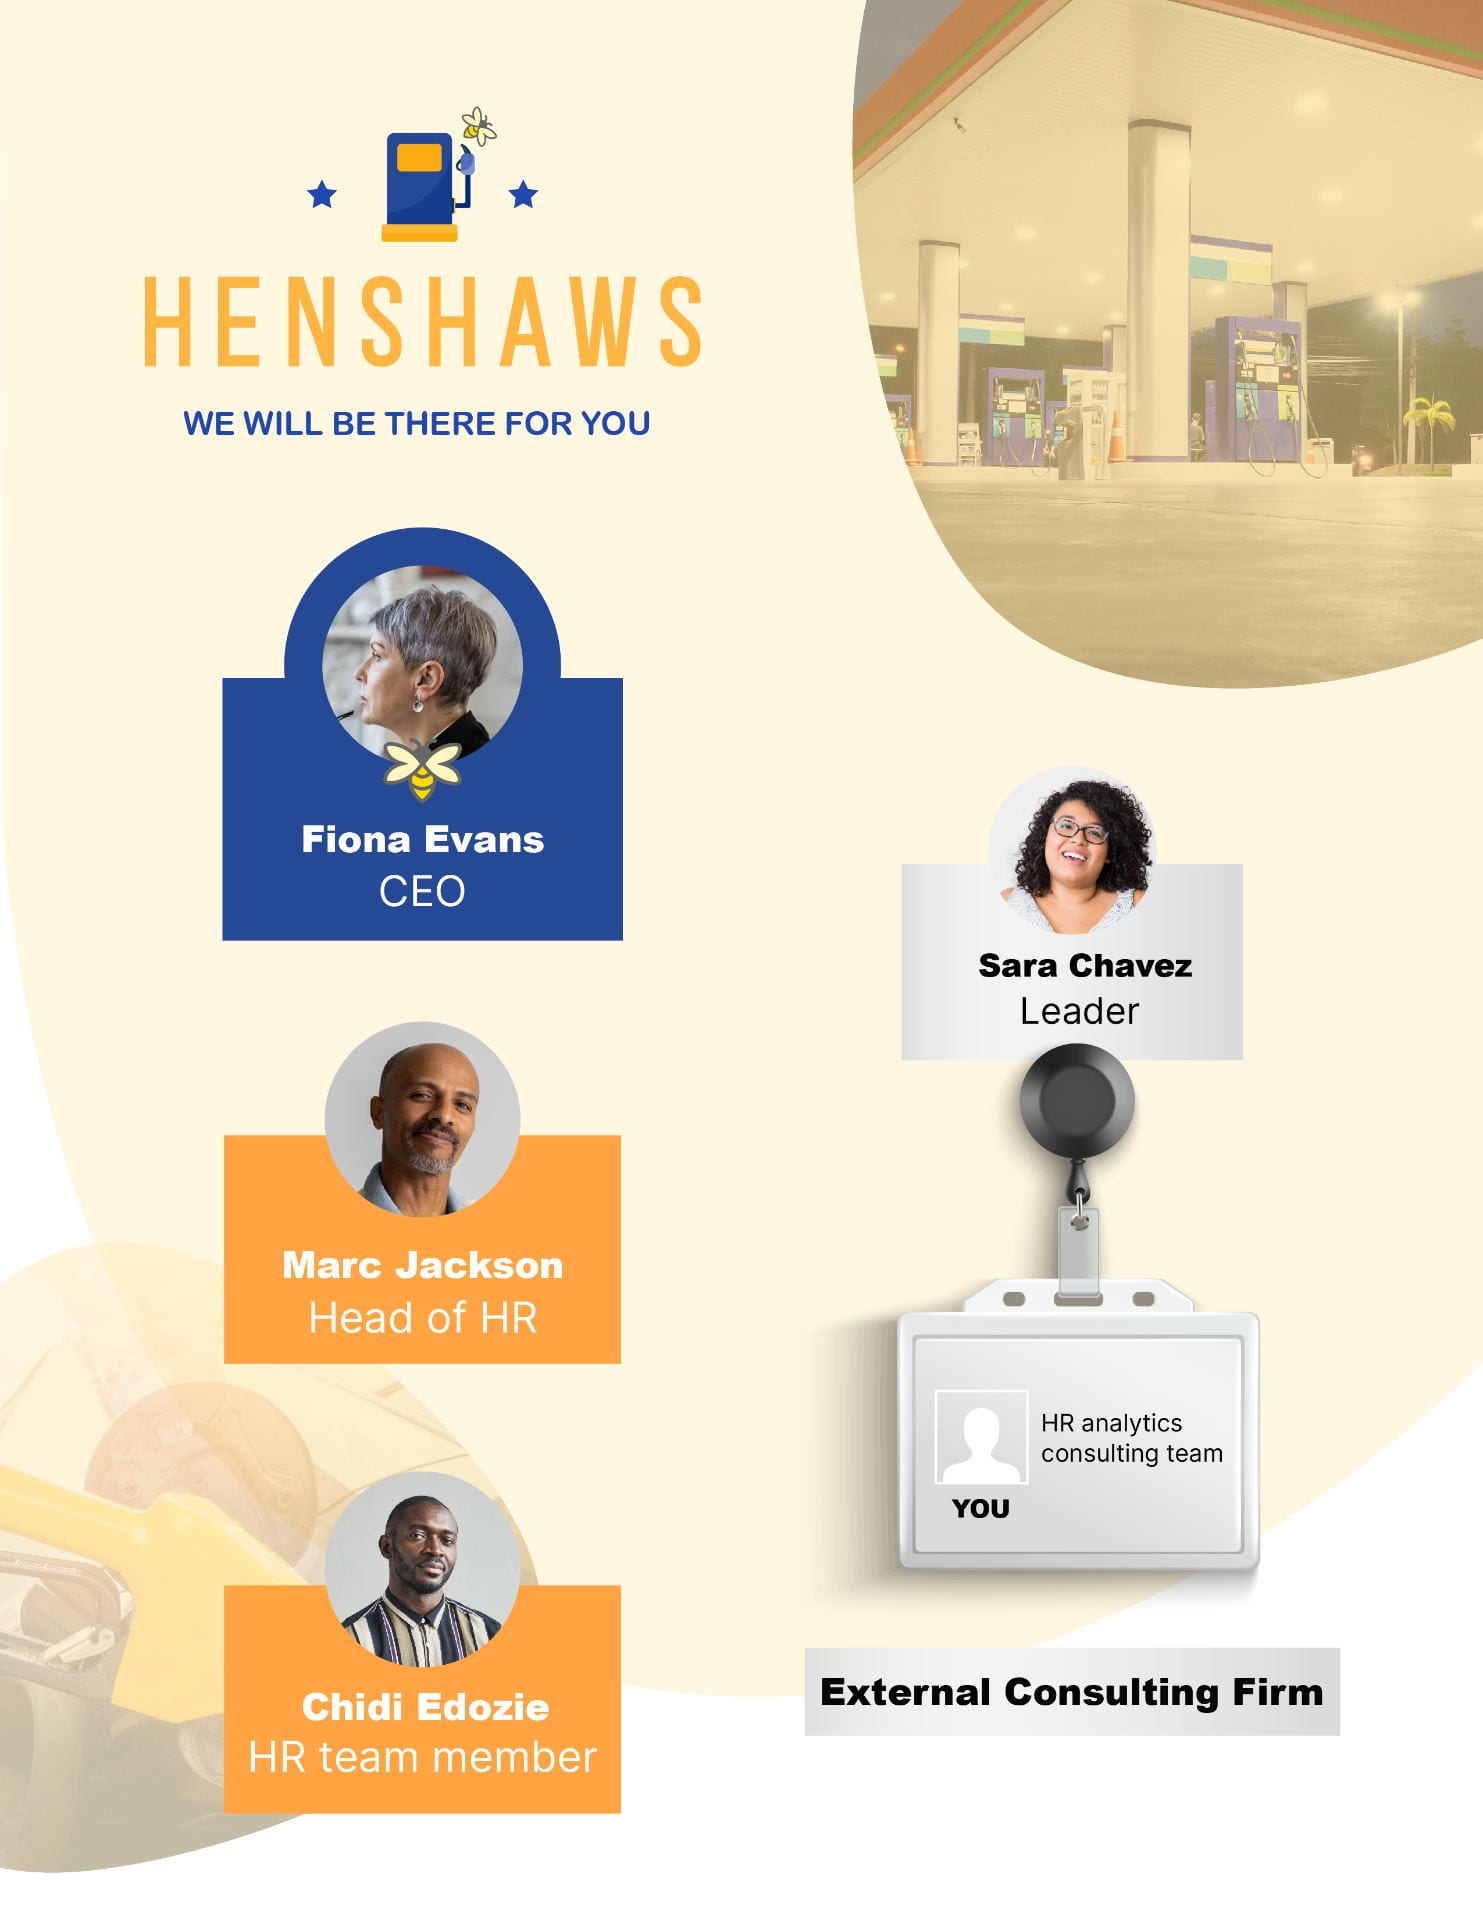 Graphic org chart of the fictional company, Henshaws, and a shortened org chart of the external consulting firm working with Henshaws.